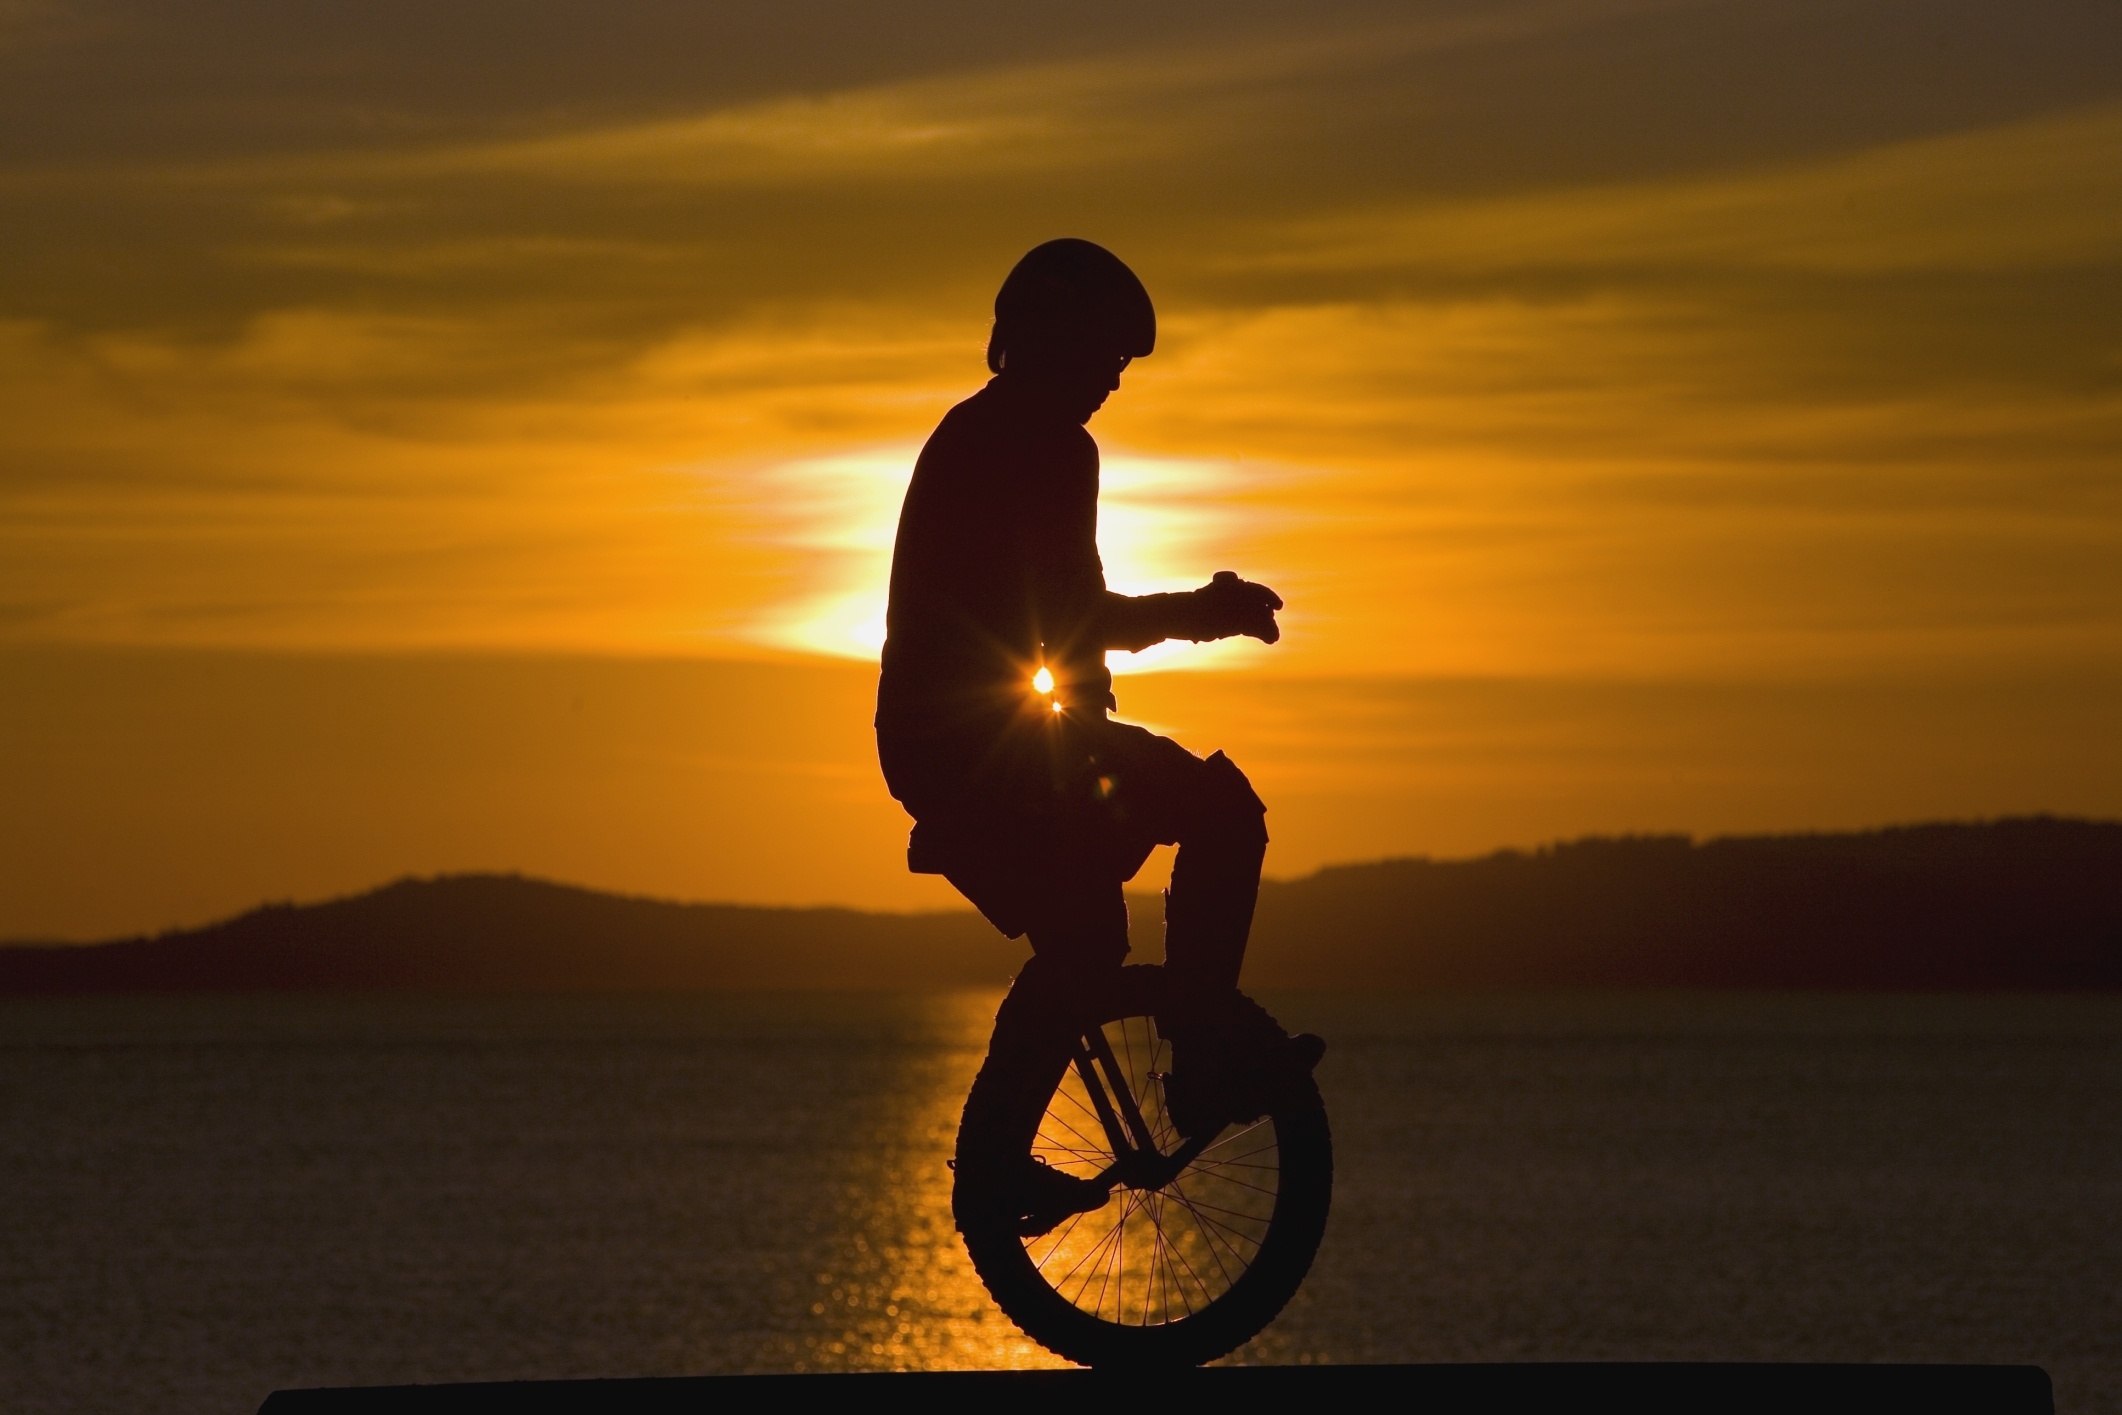 Unicycle: Affordable Cycling Vehicles For Beginners And Pro, Kris Holm Unicycles, Mountain Unicycling. 2130x1420 HD Wallpaper.